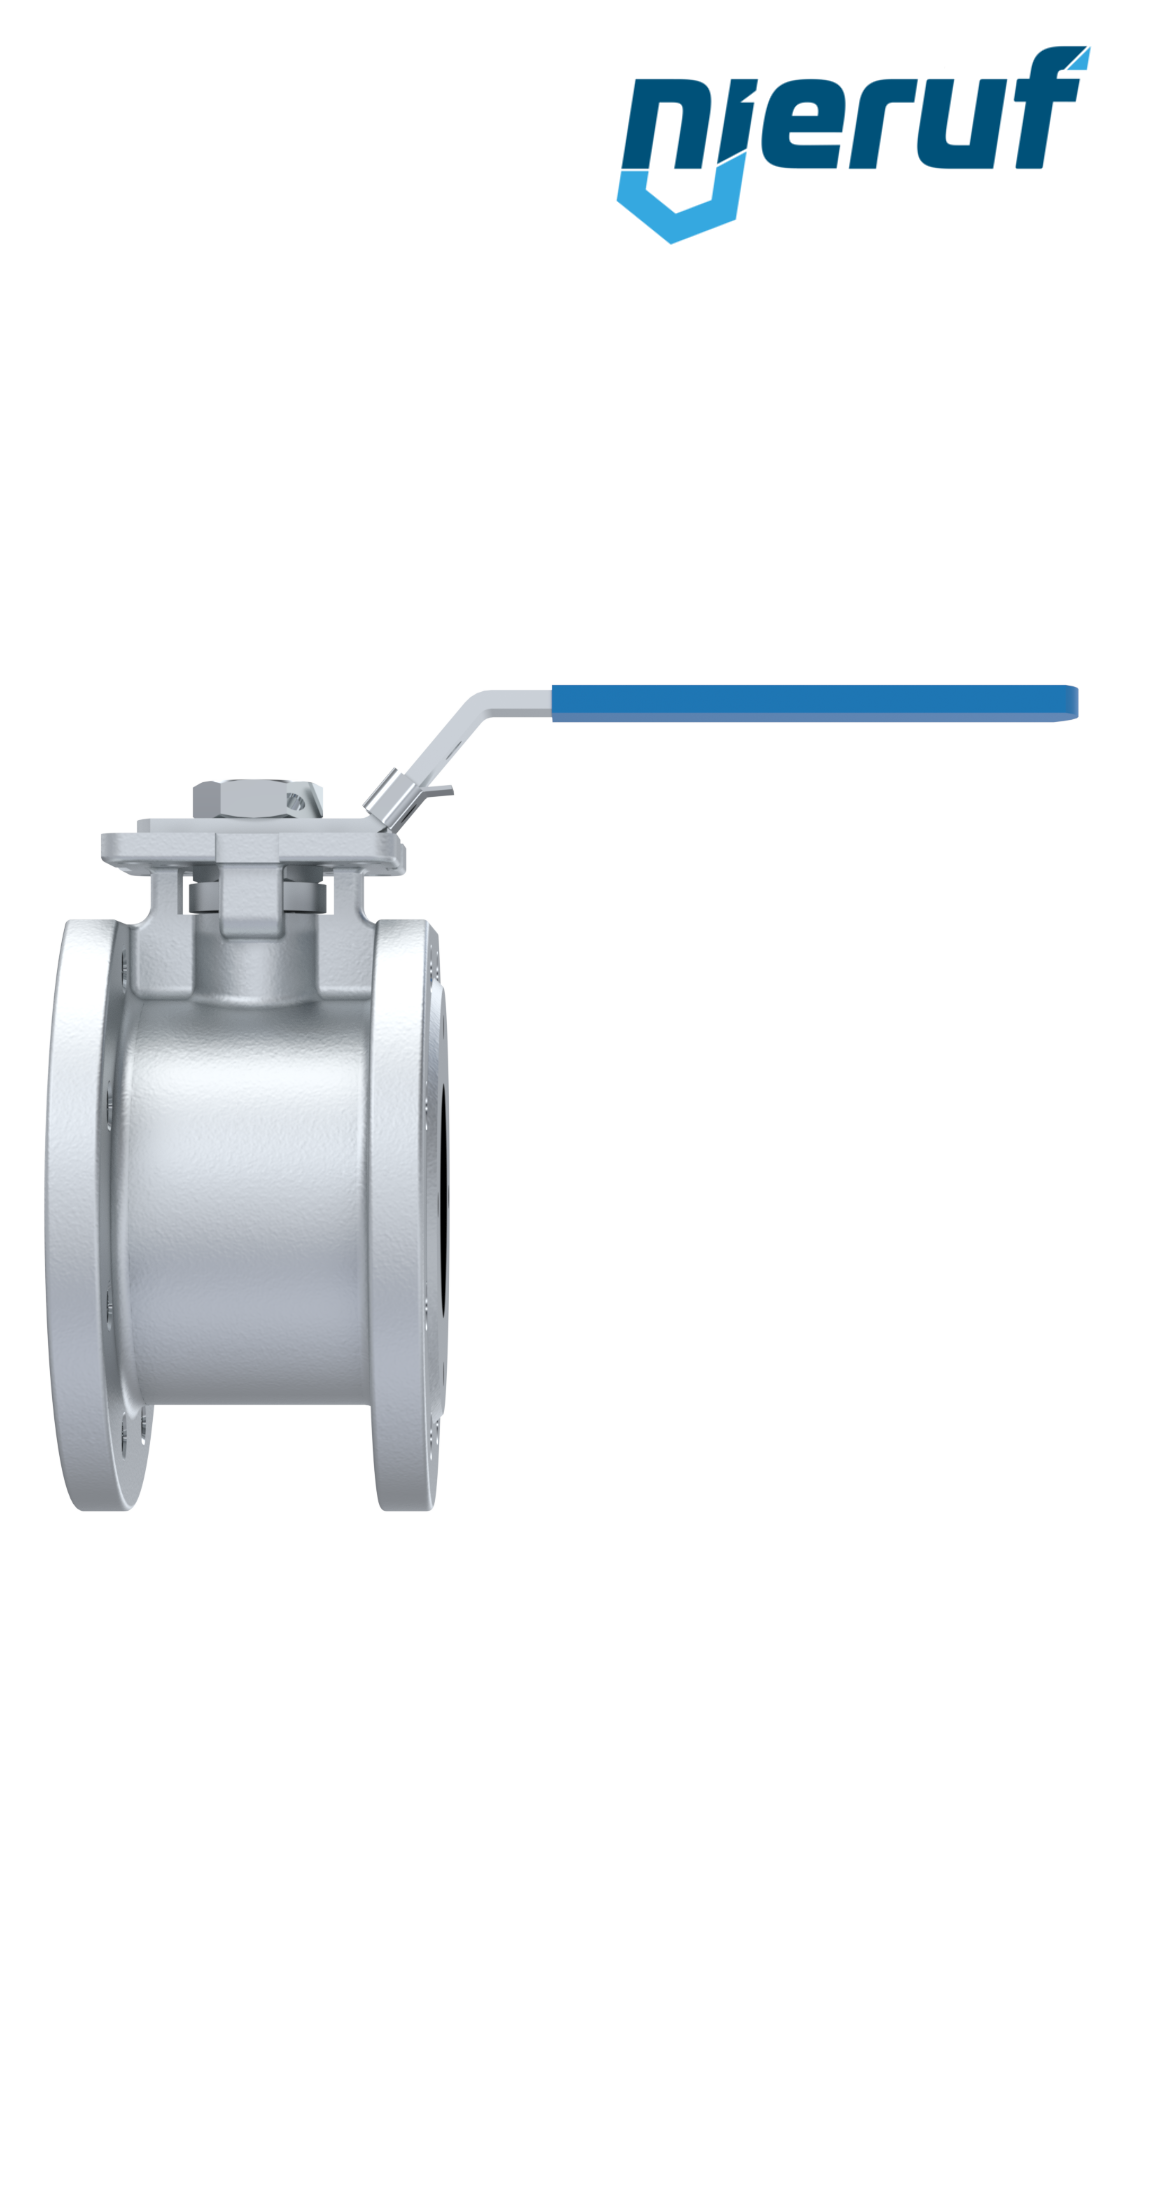 Compact ball valve DN80 PN16 FK04 stainless steel 1.4408